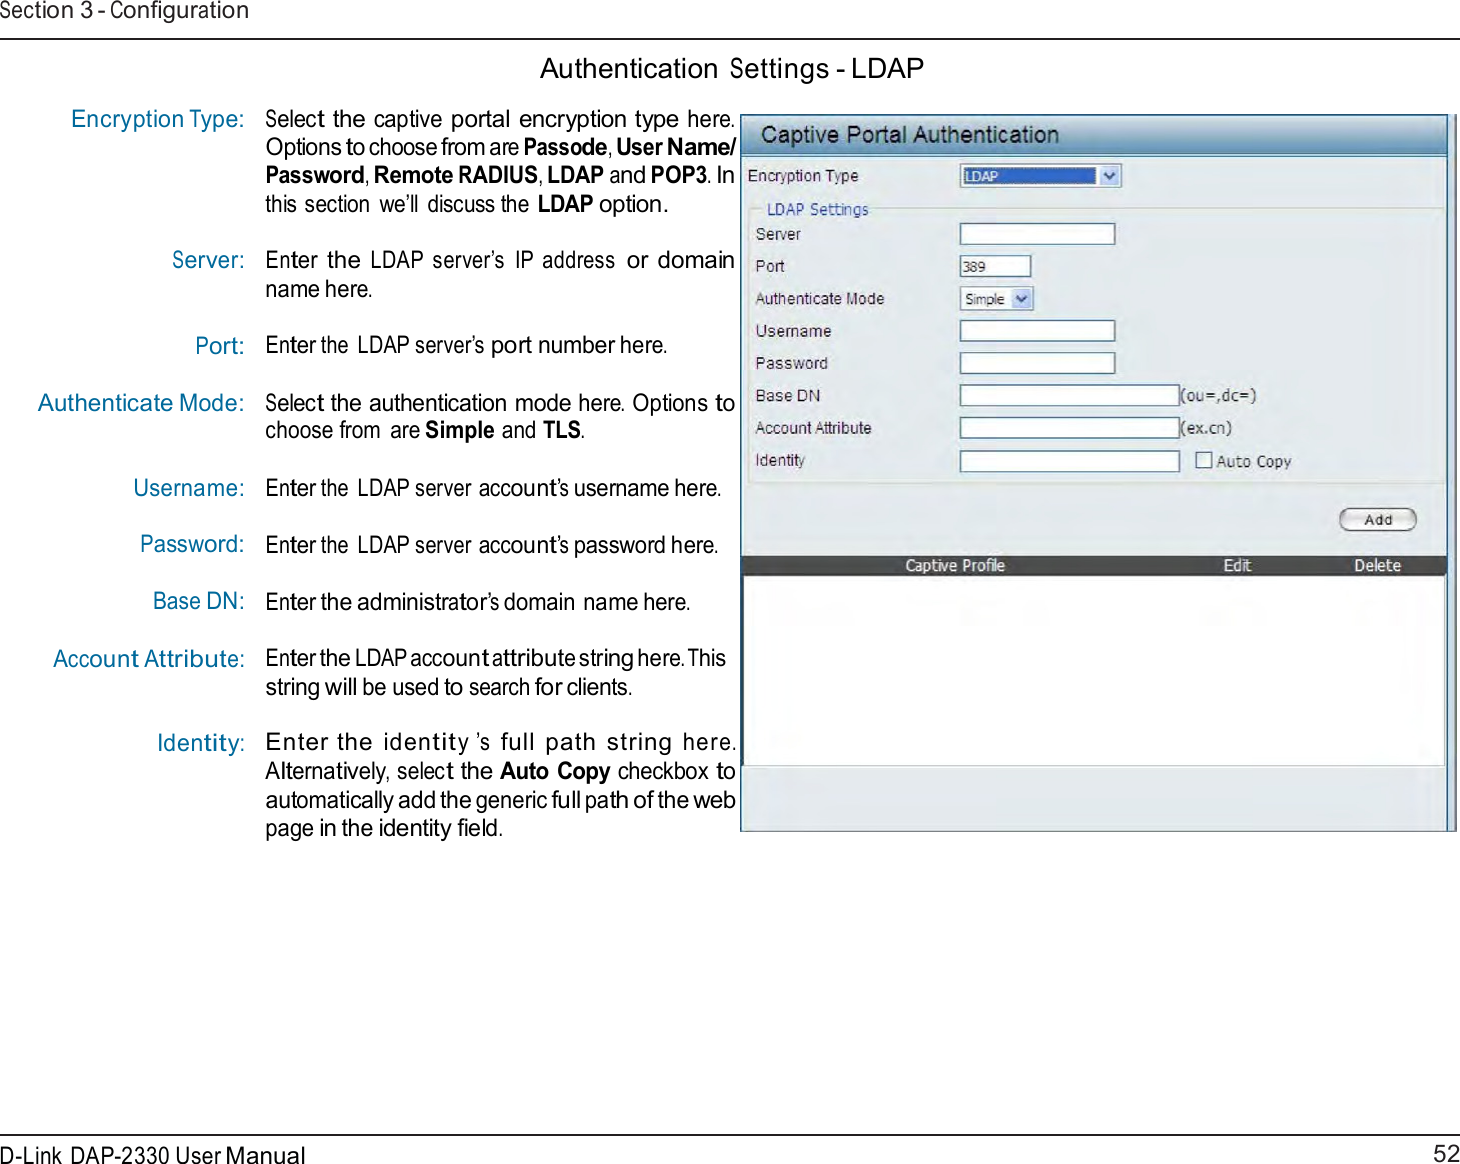 52 D-Link DAP-2330 User ManualSection 3 - Configuration        Encryption Type:    Server: Port:  Authenticate Mode:    Username: Password: Base DN: Account Attribute: Identity:  Authentication Settings - LDAP  Select the captive portal encryption type here. Options to choose from are Passode, User Name/ Password, Remote RADIUS, LDAP and POP3. In this section  we’ll  discuss the LDAP option.  Enter the LDAP server’s  IP address or domain name here.  Enter the LDAP server’s port number here.  Select the authentication mode here. Options to choose from  are Simple and TLS. Enter the LDAP server account’s username here. Enter the LDAP server account’s password here. Enter the administrator’s domain name here. Enter the LDAP account attribute string here. This string will be used to search for clients.  Enter the identity ’s full path string here. Alternatively, select the Auto Copy checkbox to automatically add the generic full path of the web page in the identity field. 